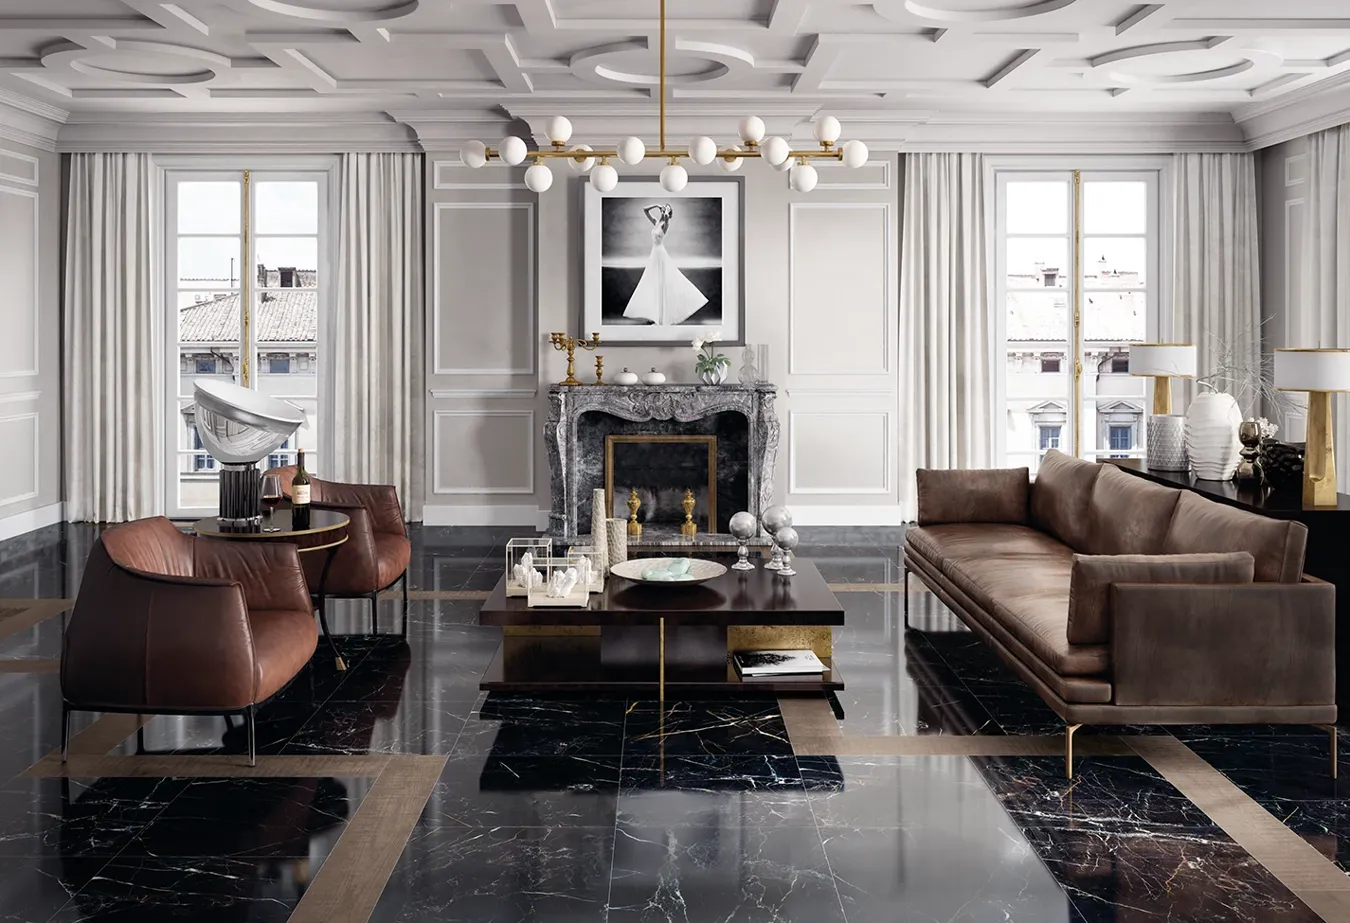 Luxury interior showcasing Elements Lux collection's Port Laurent marble-effect porcelain stoneware flooring, accented with brown leather furniture and gold details.